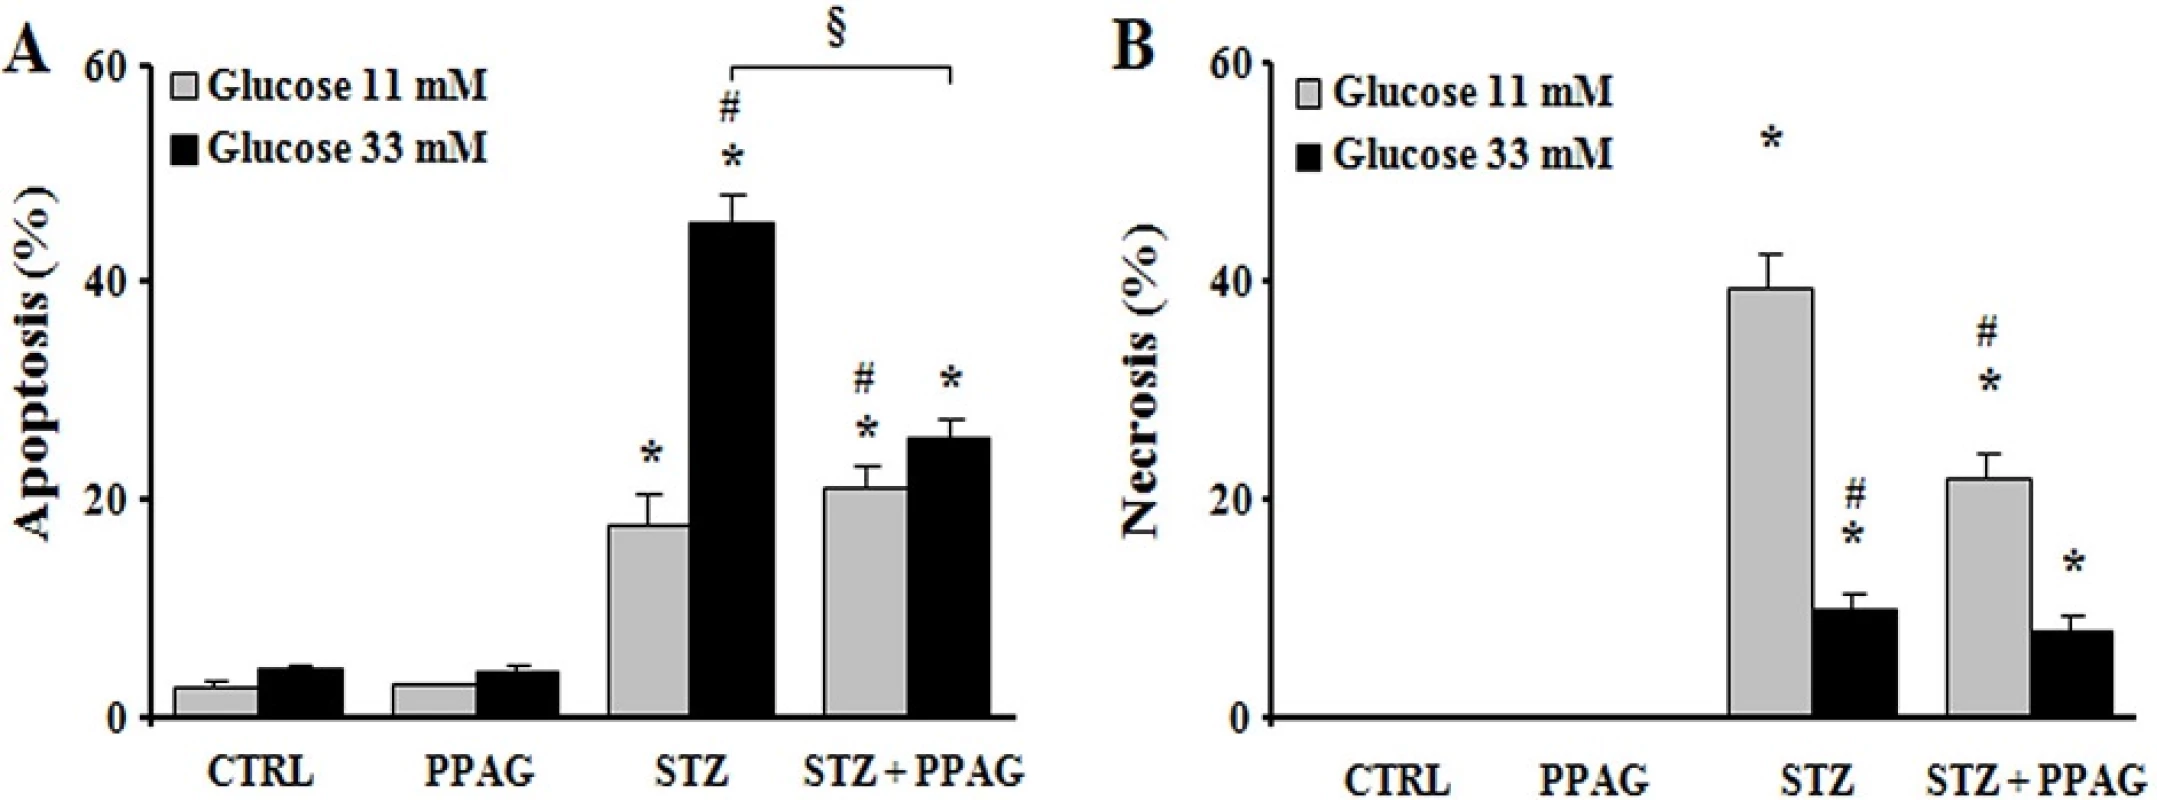 In vitro beta cell protection from STZ by PPAG. INS-1E cells were pre-treated with 30 μM PPAG for 16 hours, exposed to 1 mM streptozotocin for 1 hour and then cultured for 23 hours in medium containing 11 or 33 mM glucose with or without PPAG (n = 3). The percentage of apoptotic (A) and necrotic cells (B) was determined following staining with the nuclear dyes propidium iodide and Hoechst 33342. A minimum of 500 cells was counted for each condition. Percentage of apoptotic (A) and necrotic cells (B). *p<0.05 against control (CTRL). #p<0.05 against STZ-treated cells in 11 mM glucose. §p<0.05 as indicated.